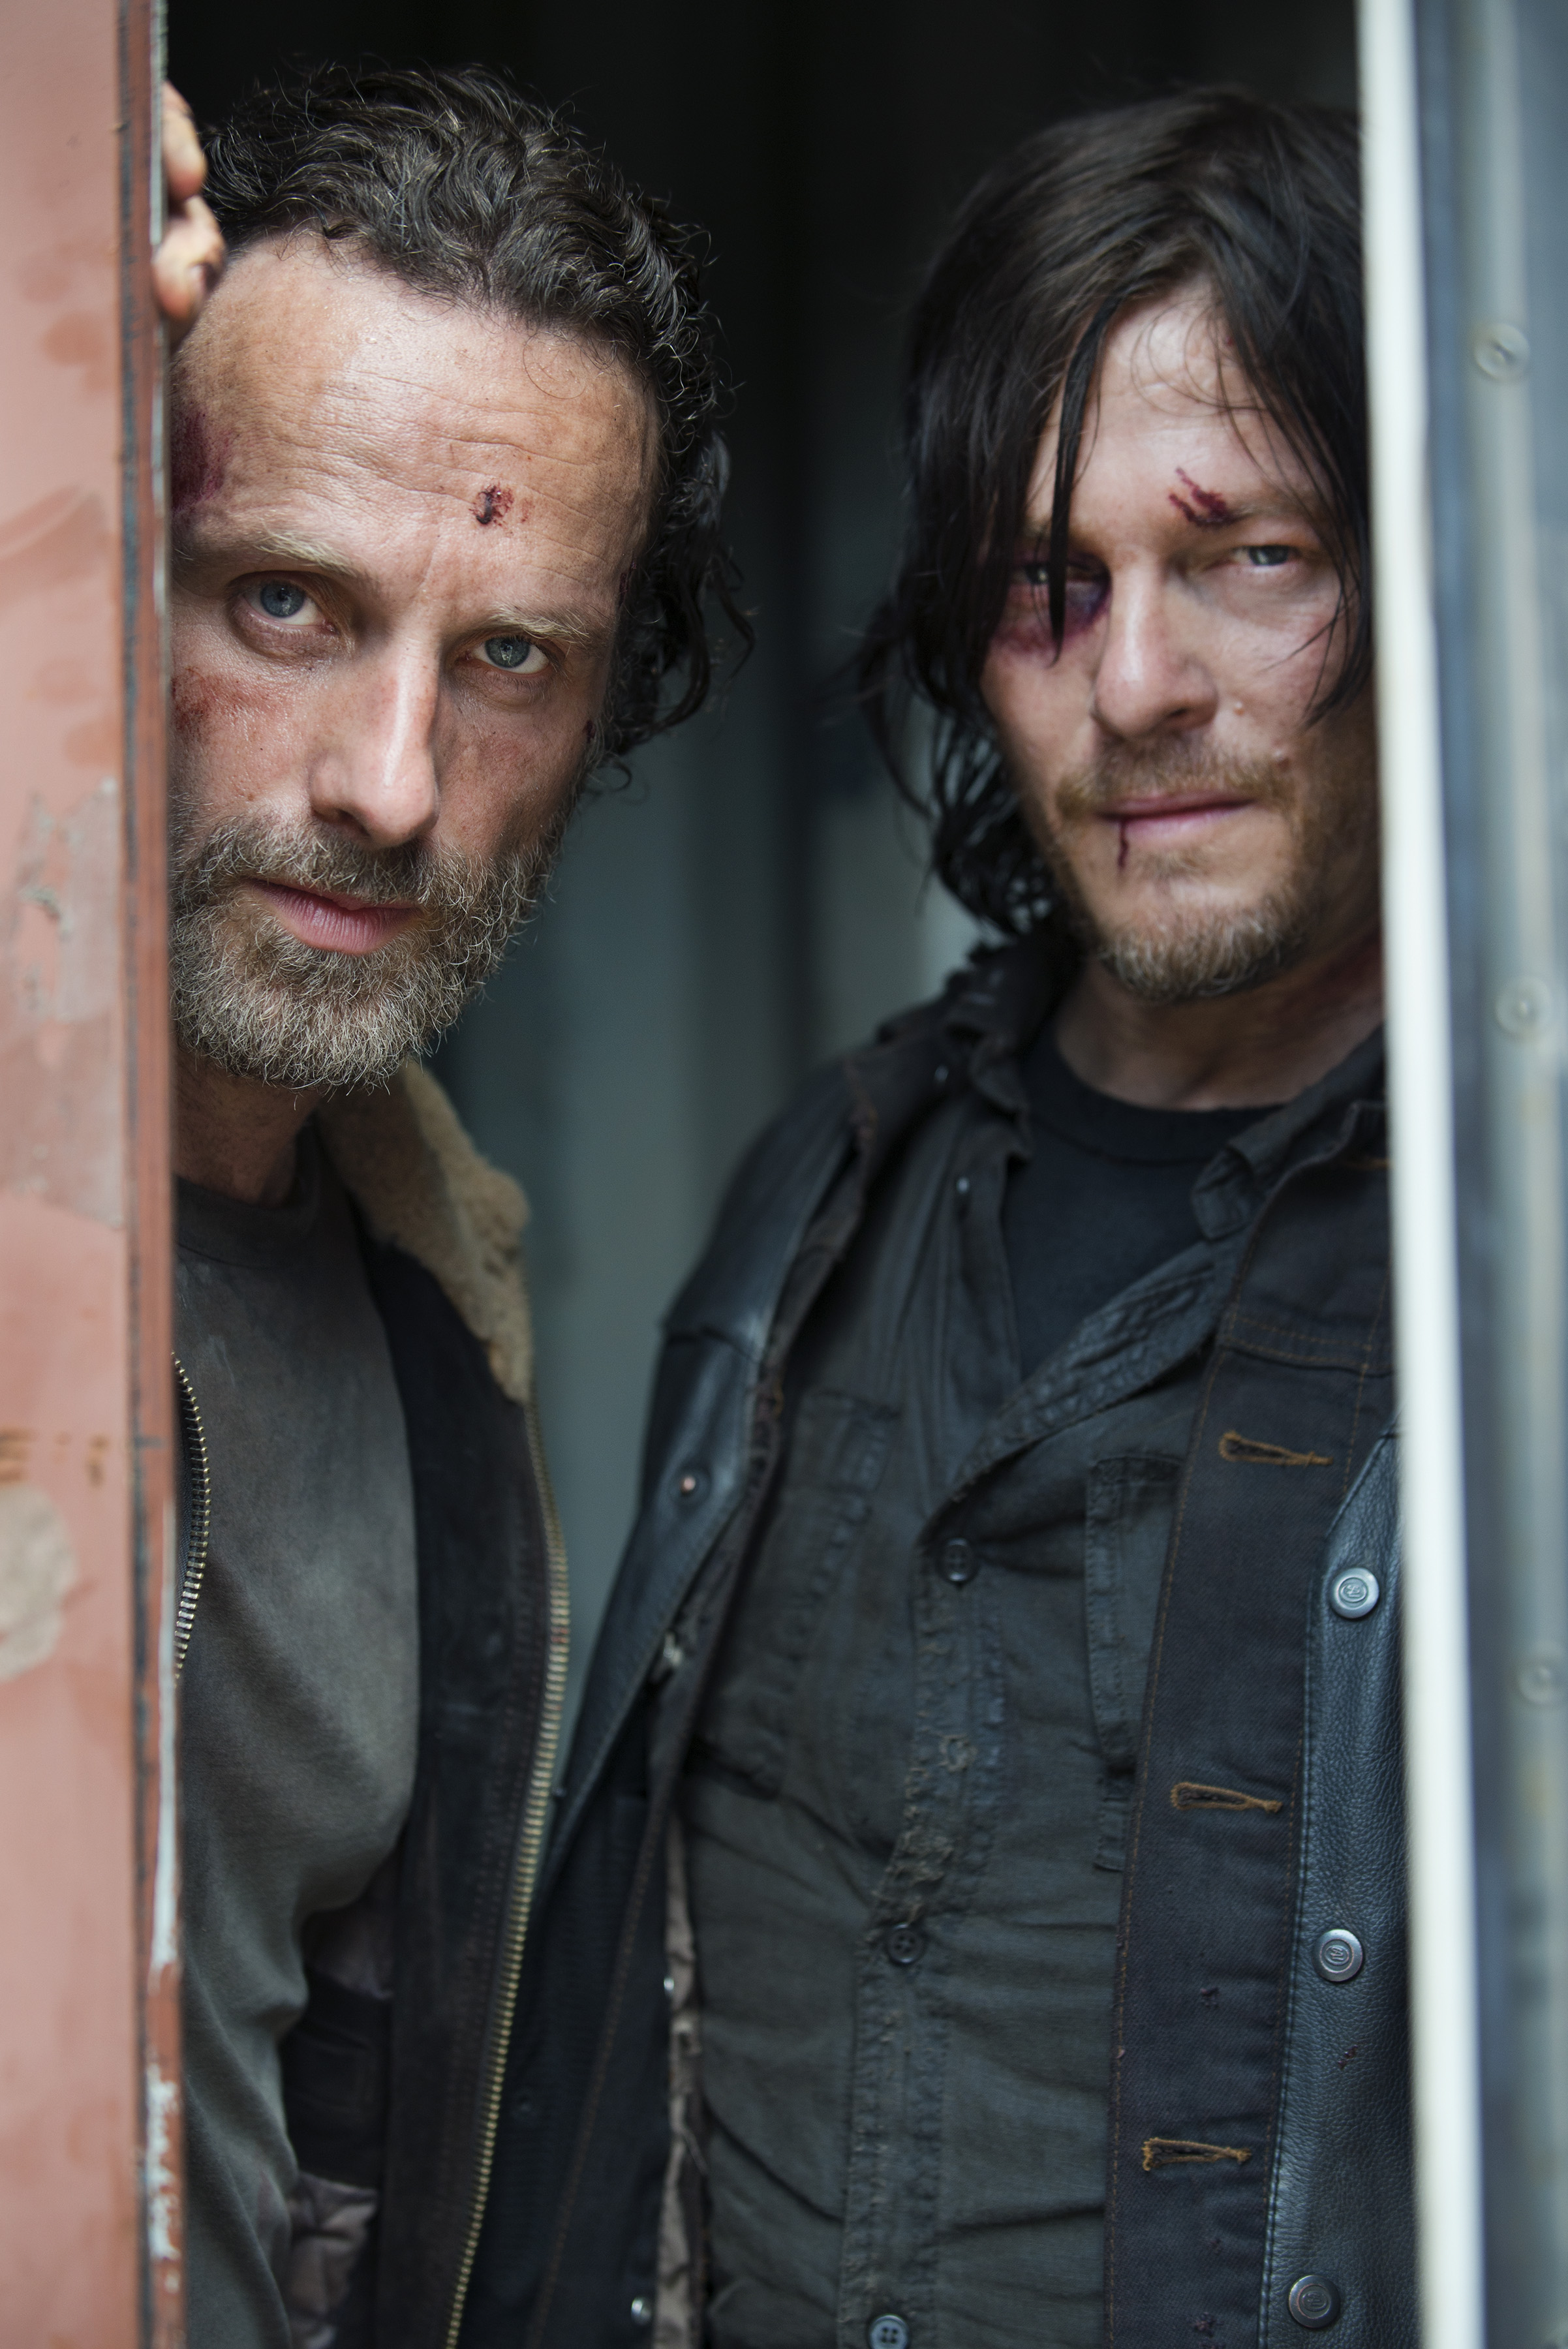 Andrew Lincoln as Rick Grimes and Norman Reedus as Daryl Dixon - The Walking Dead _ Season 5, Episode 1 - Photo Credit: Gene Page/AMC